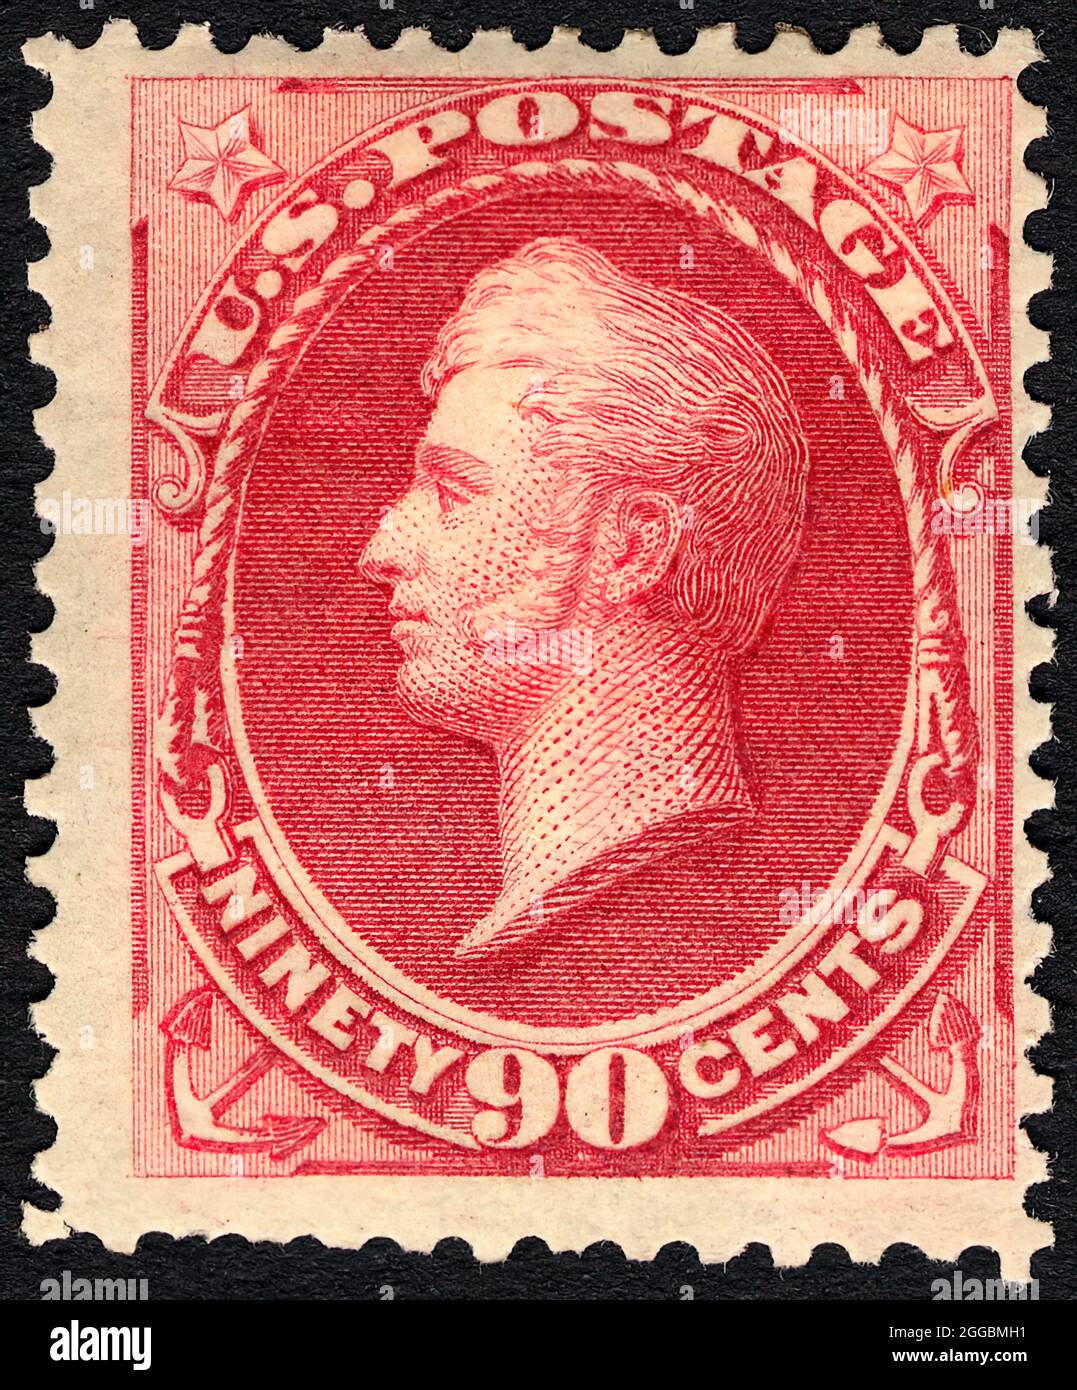 90c Commodore Oliver Hazard Perry Single, 25 juin 1875. Banque D'Images